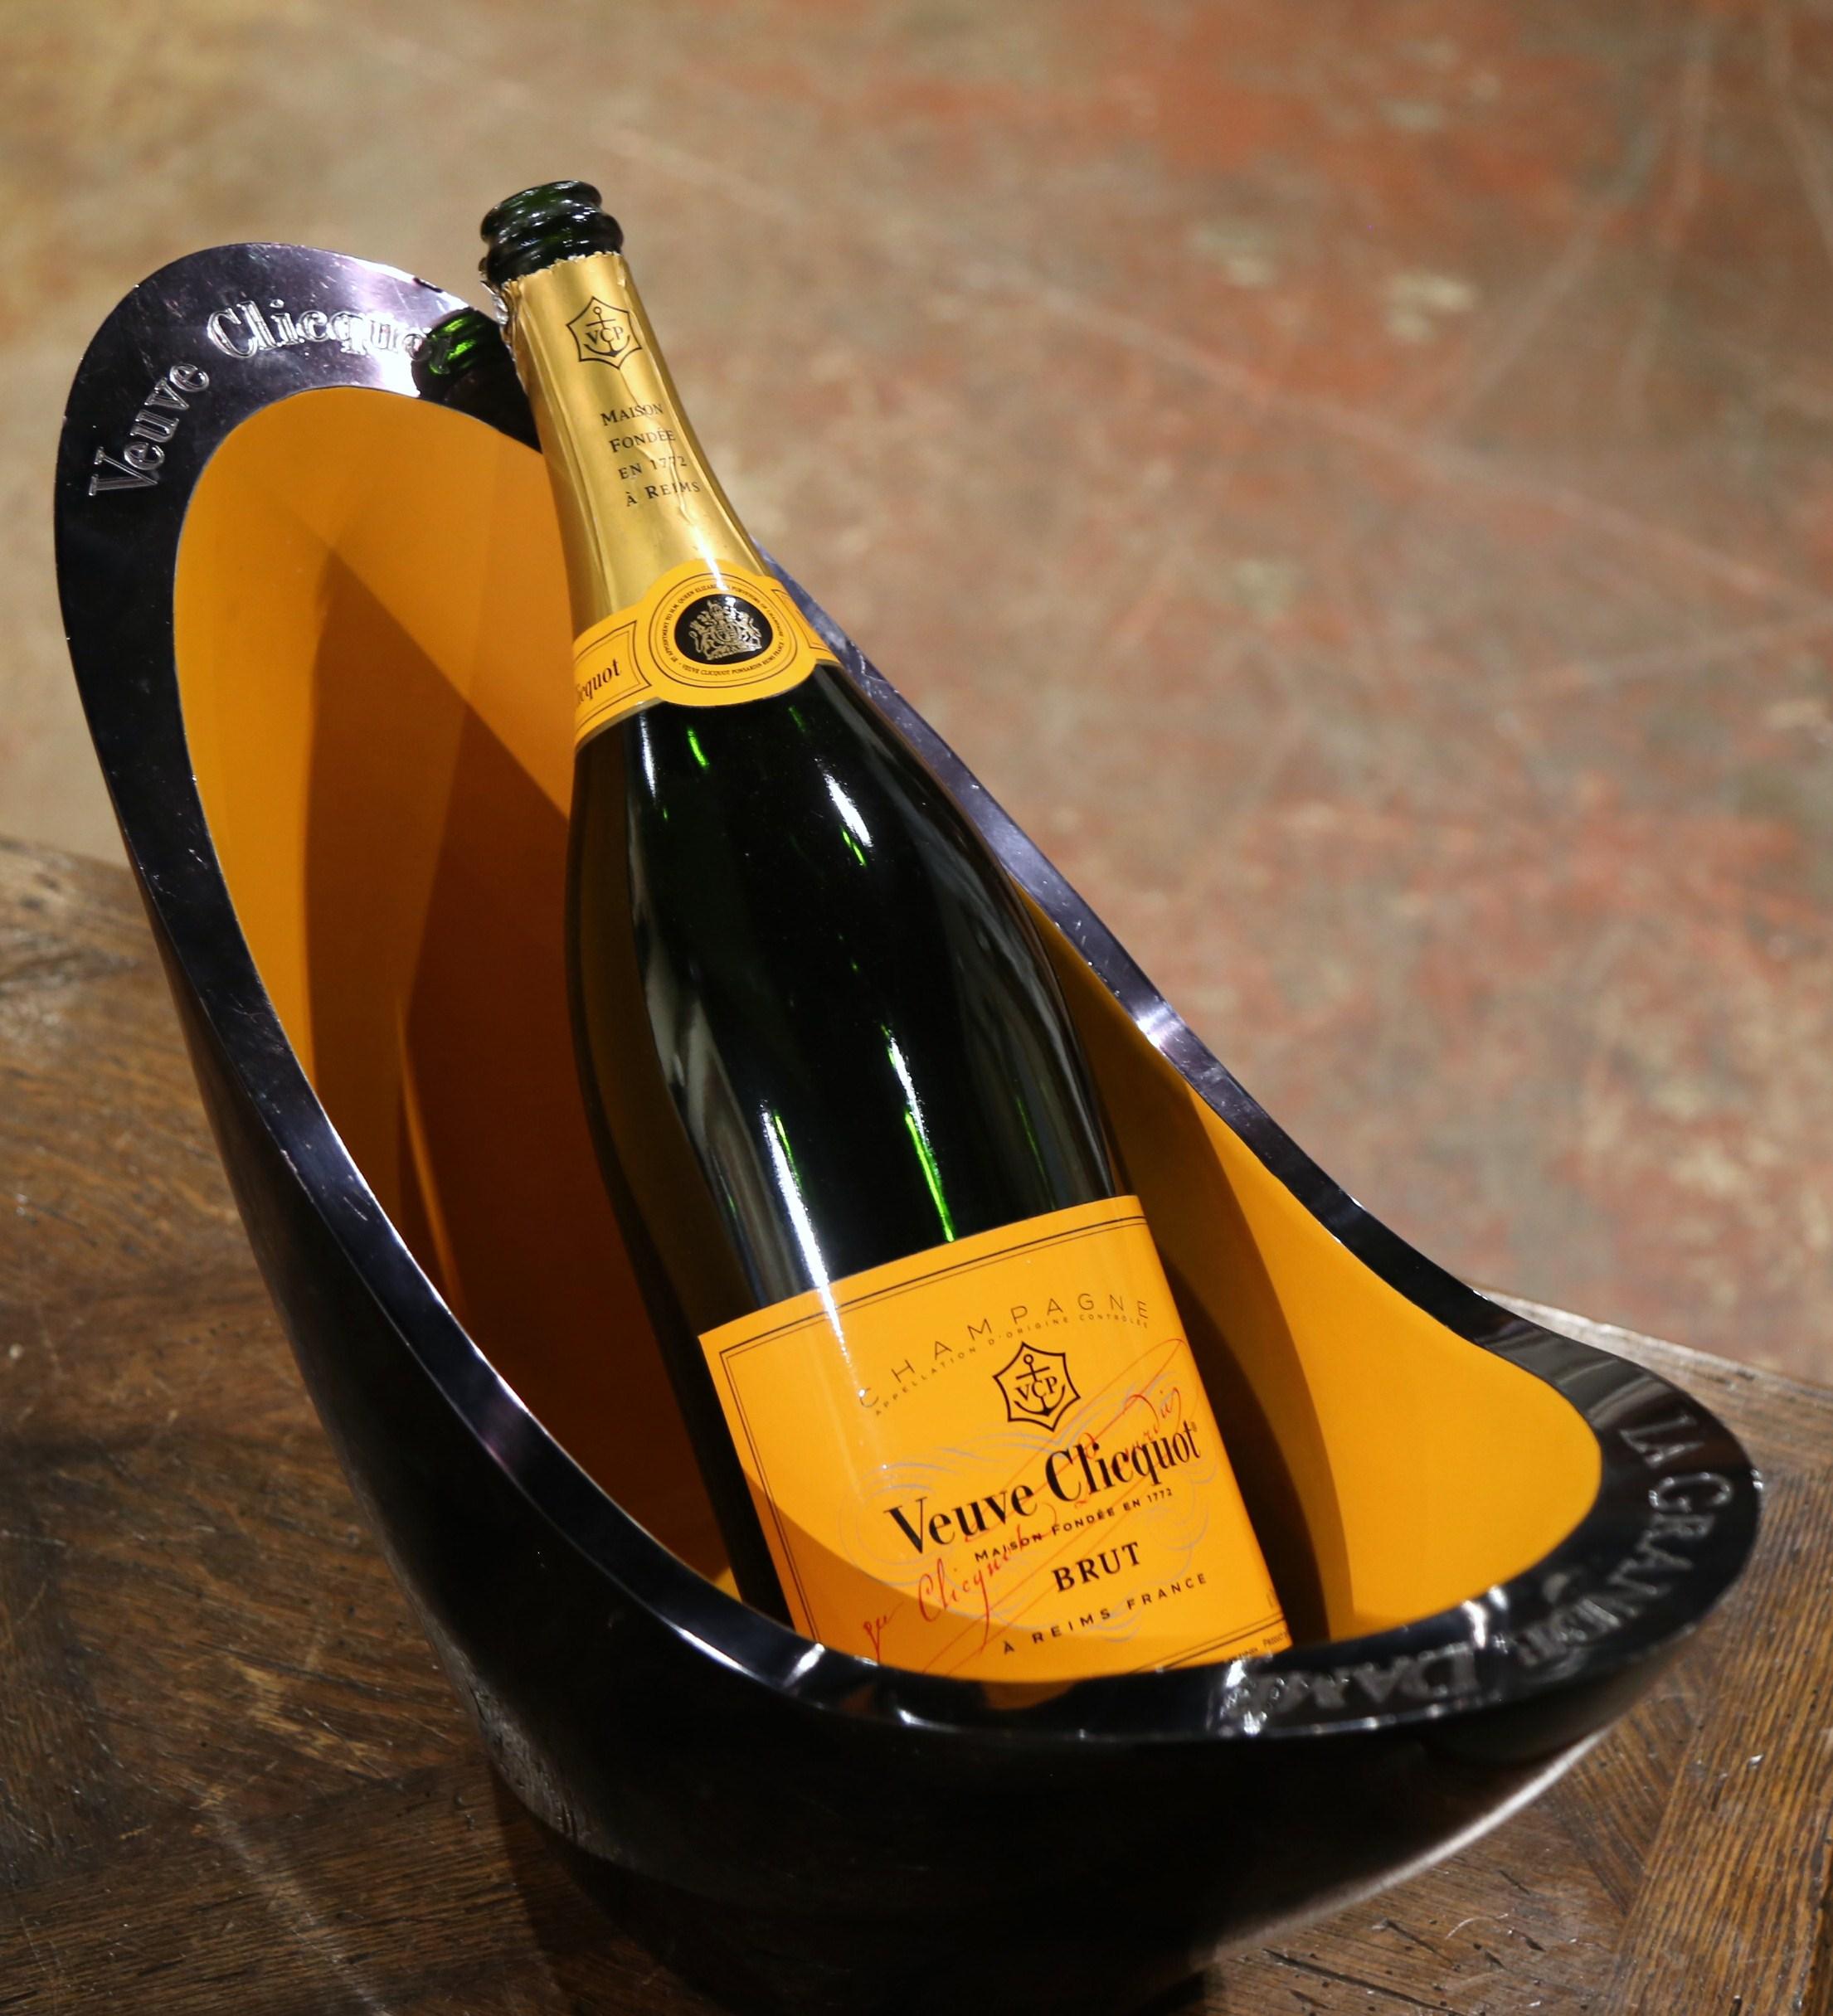 Serve champagne in style with this elegant Jeroboam champagne cooler. Crafted in France circa 1980 and made of stainless steel, the vintage 